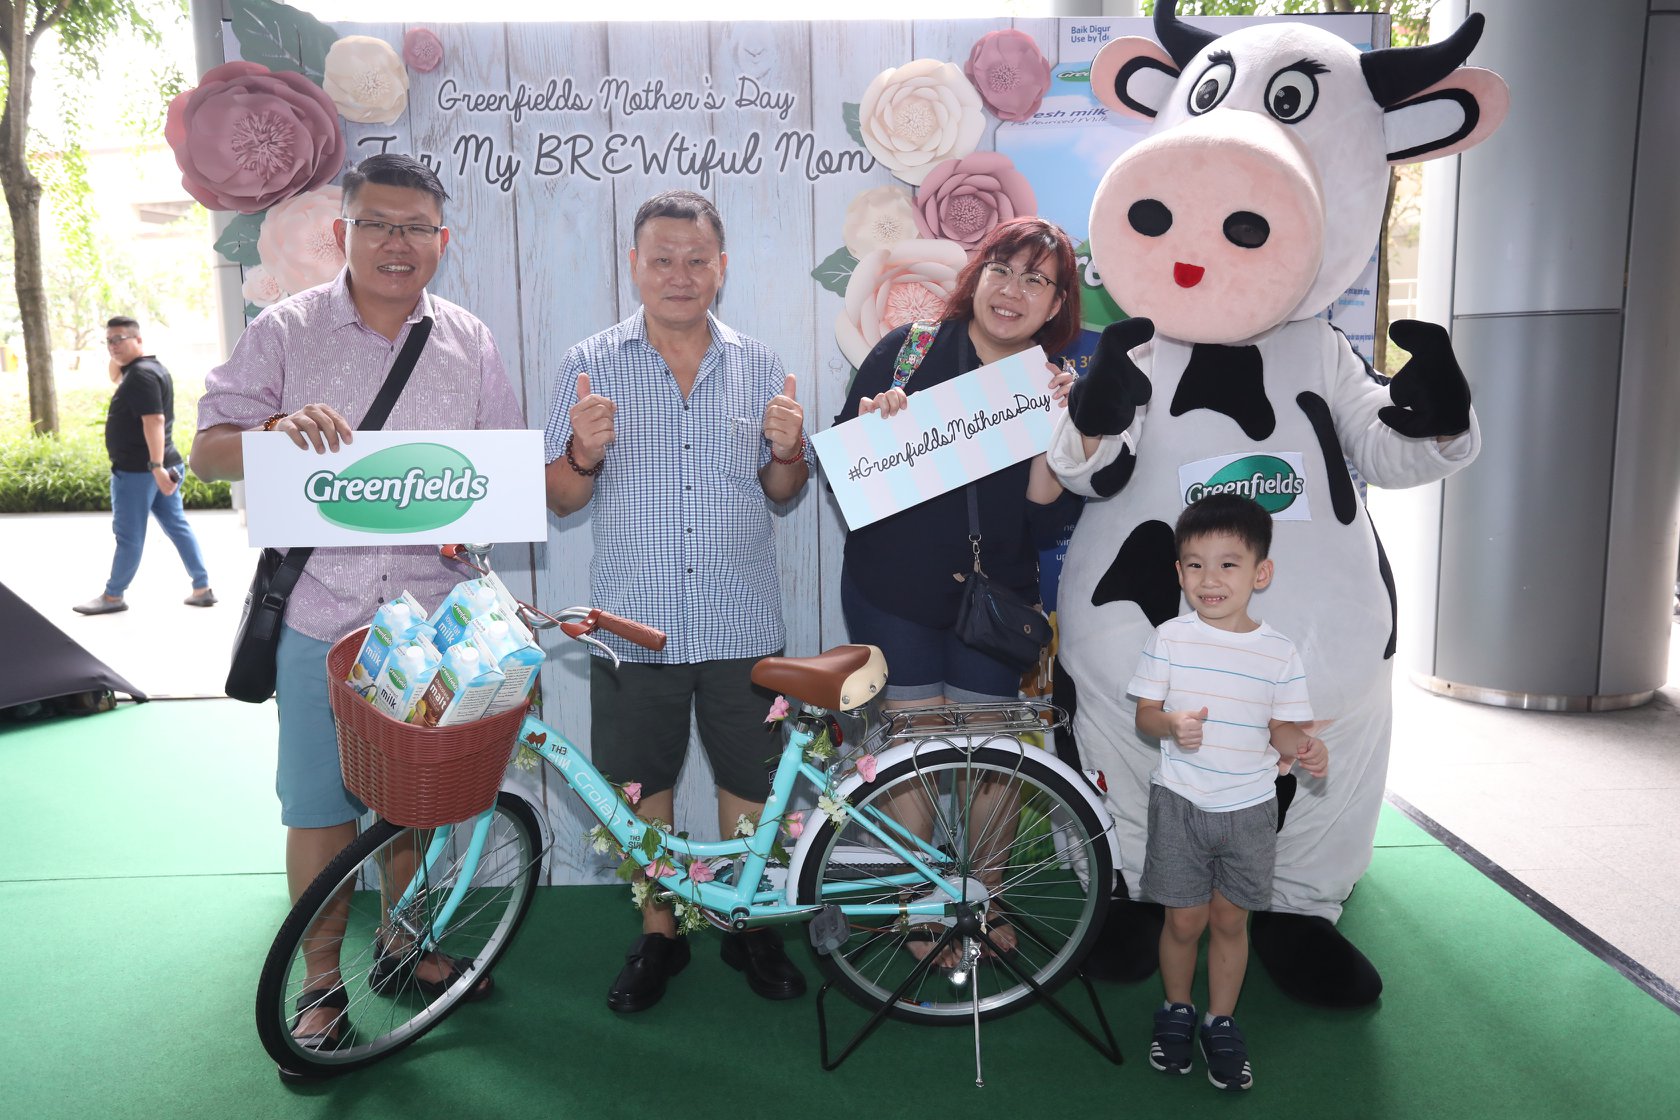 Greenfields Mother’s Day pop-up events in Singapore | IH Digital